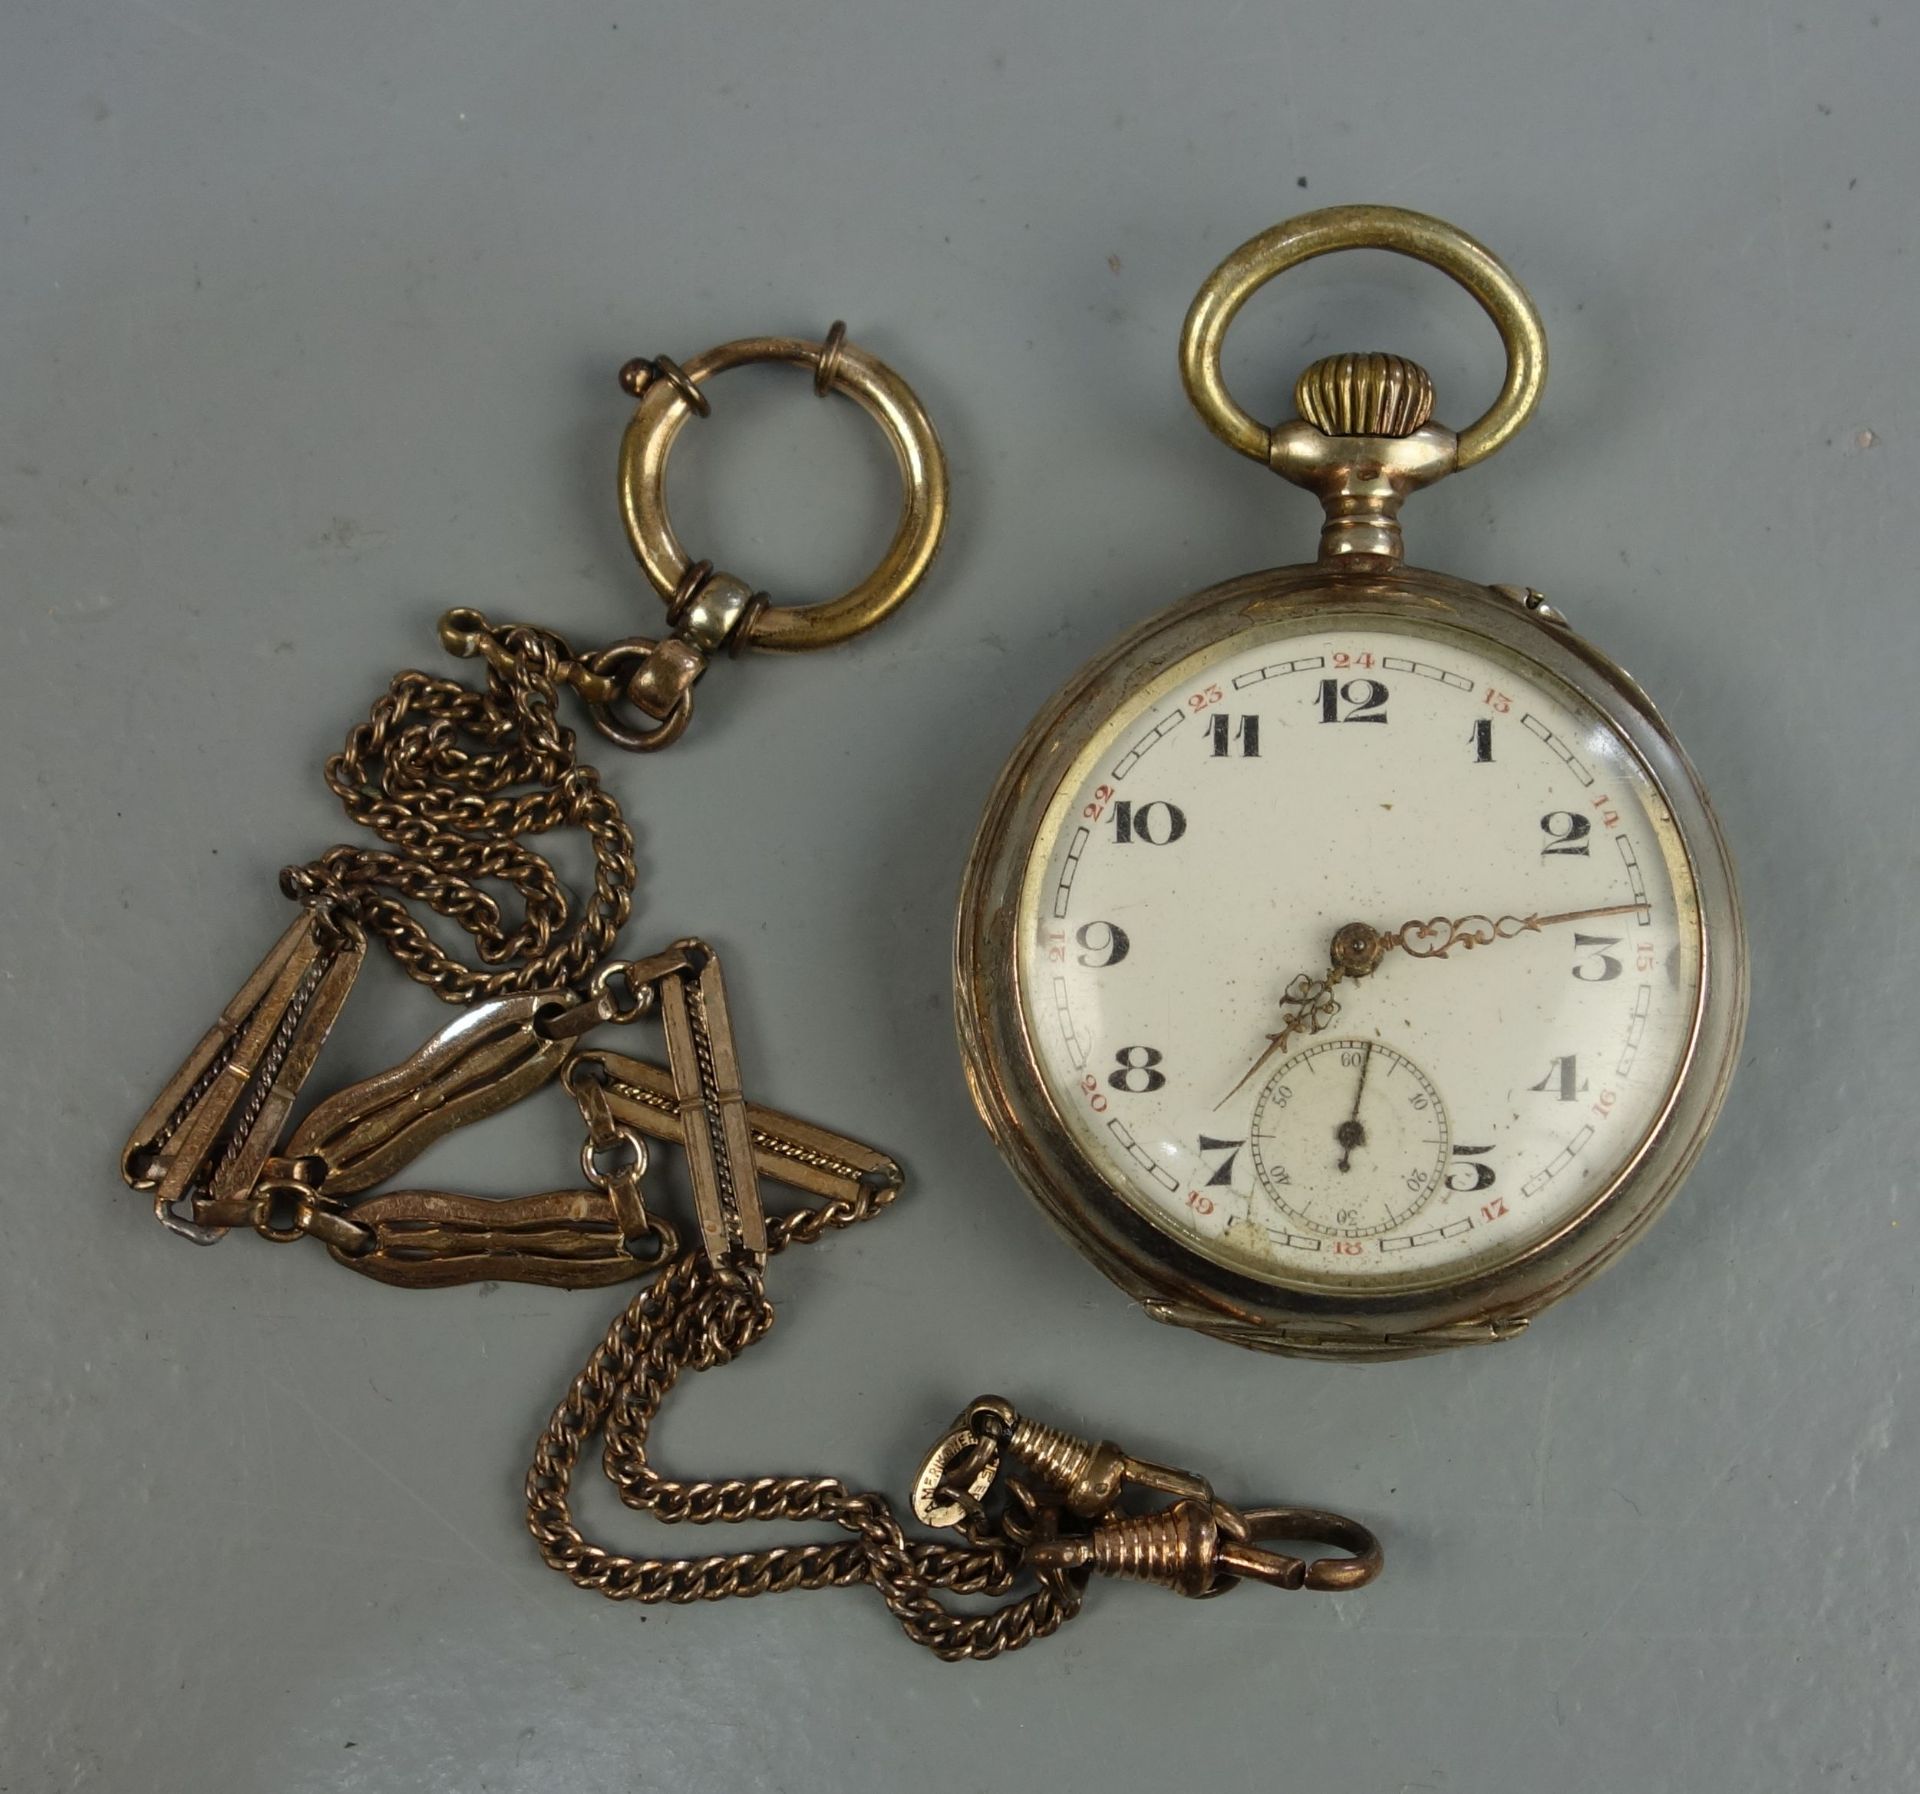 SILVER POCKET WATCH WITH POCKET WATCH CHAIN